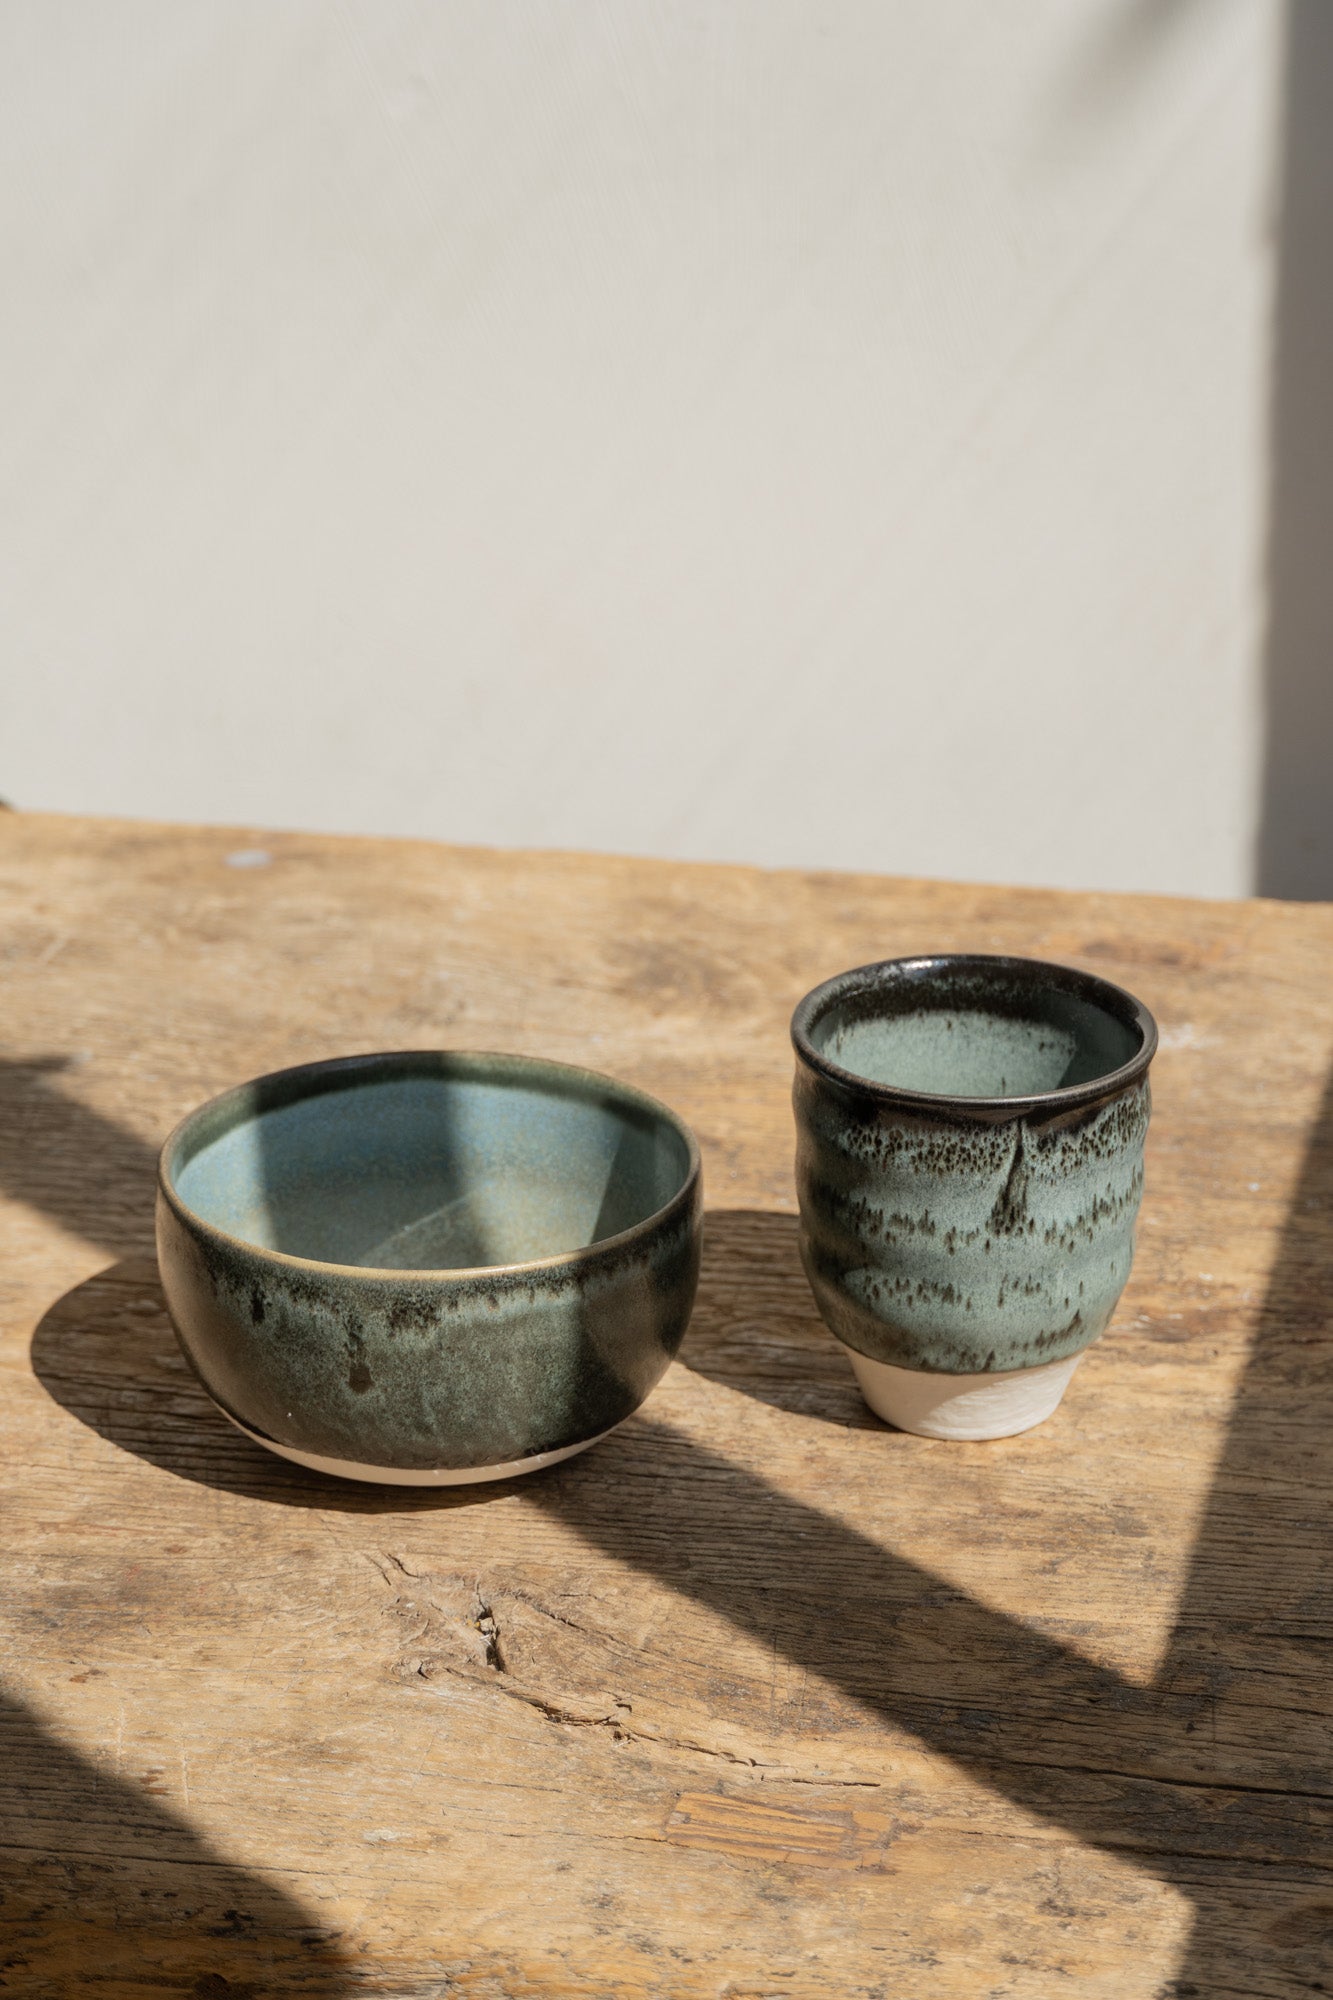 Dashi Tumbler and Cup in Charbon by Jars Ceramistes.